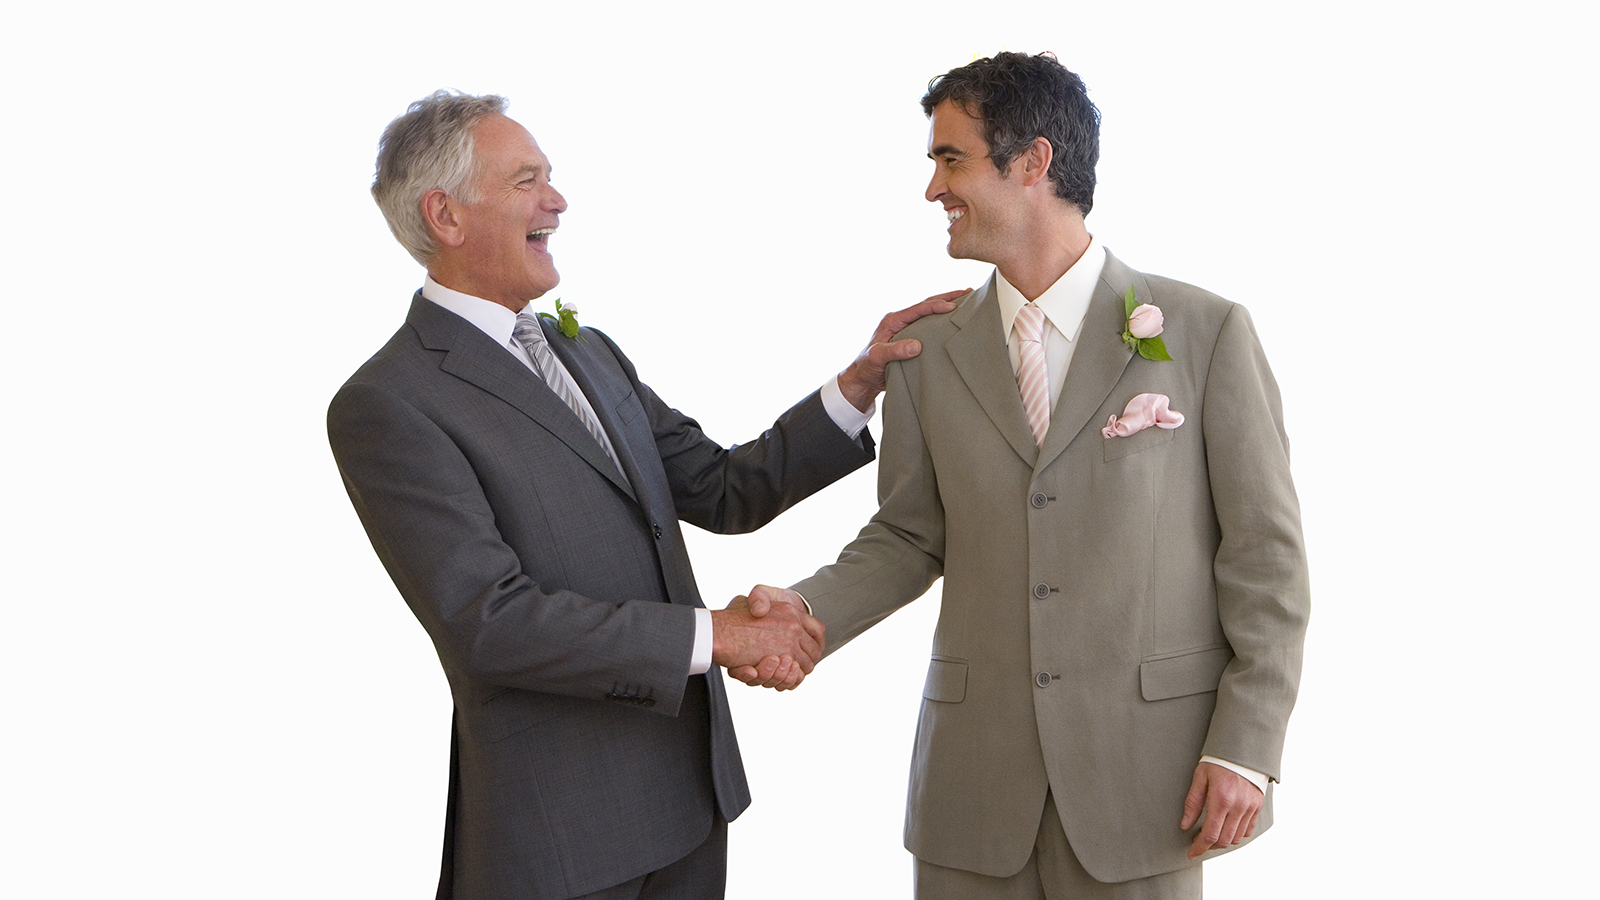 Groom and usher shaking hands, smiling at each other, side view, cut out